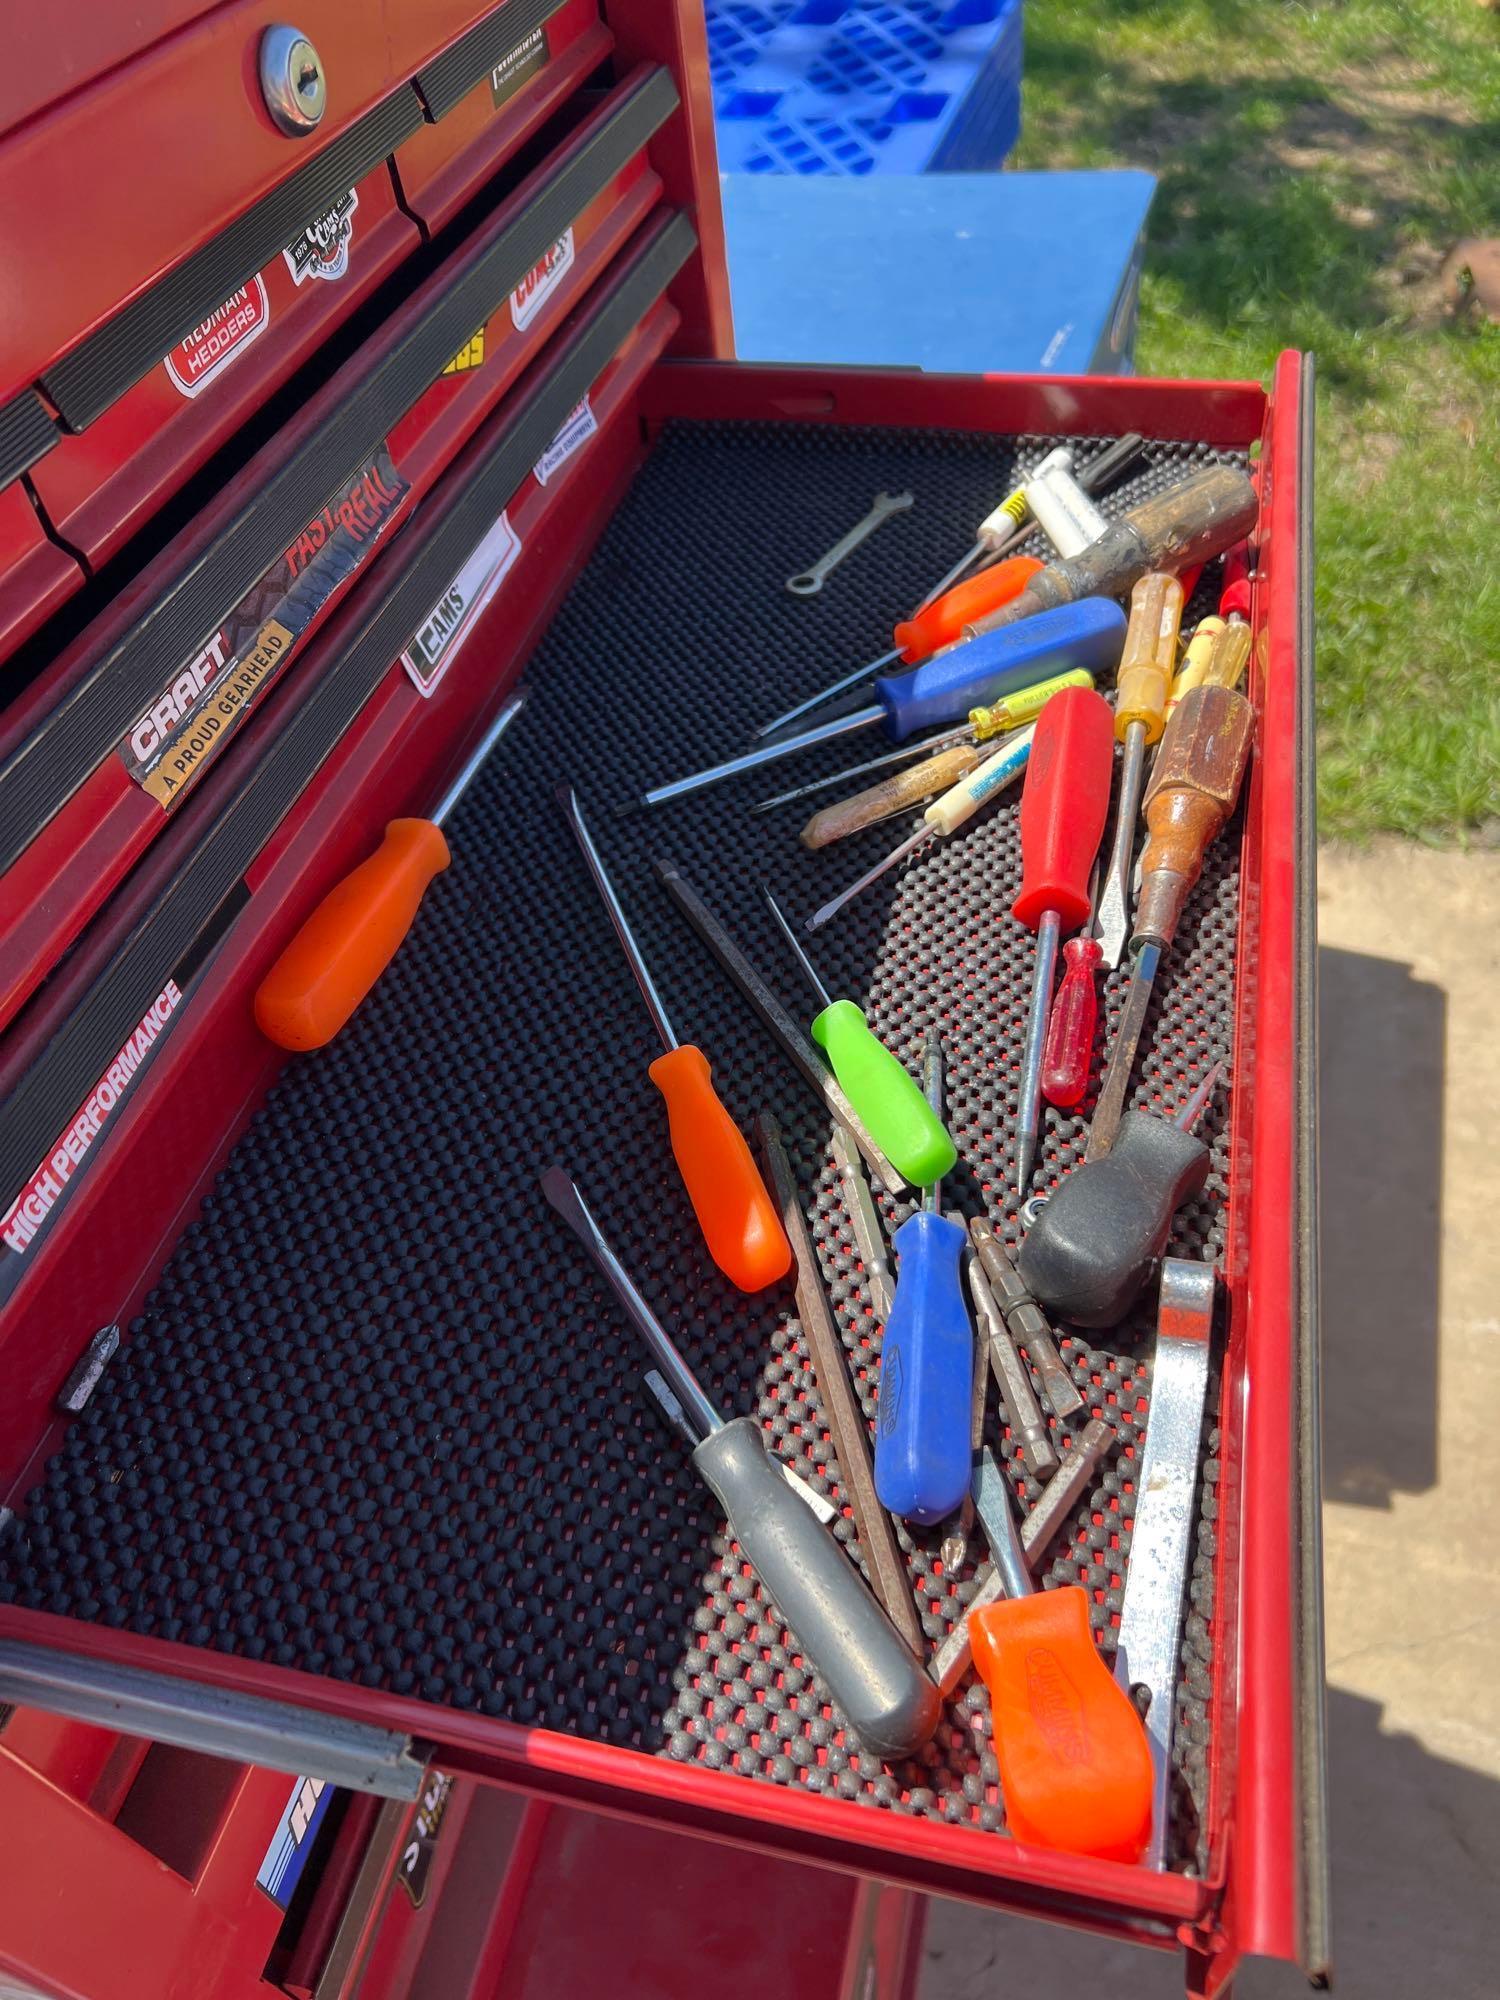 Craftsman Rolling Toolbox with Misc. Tools